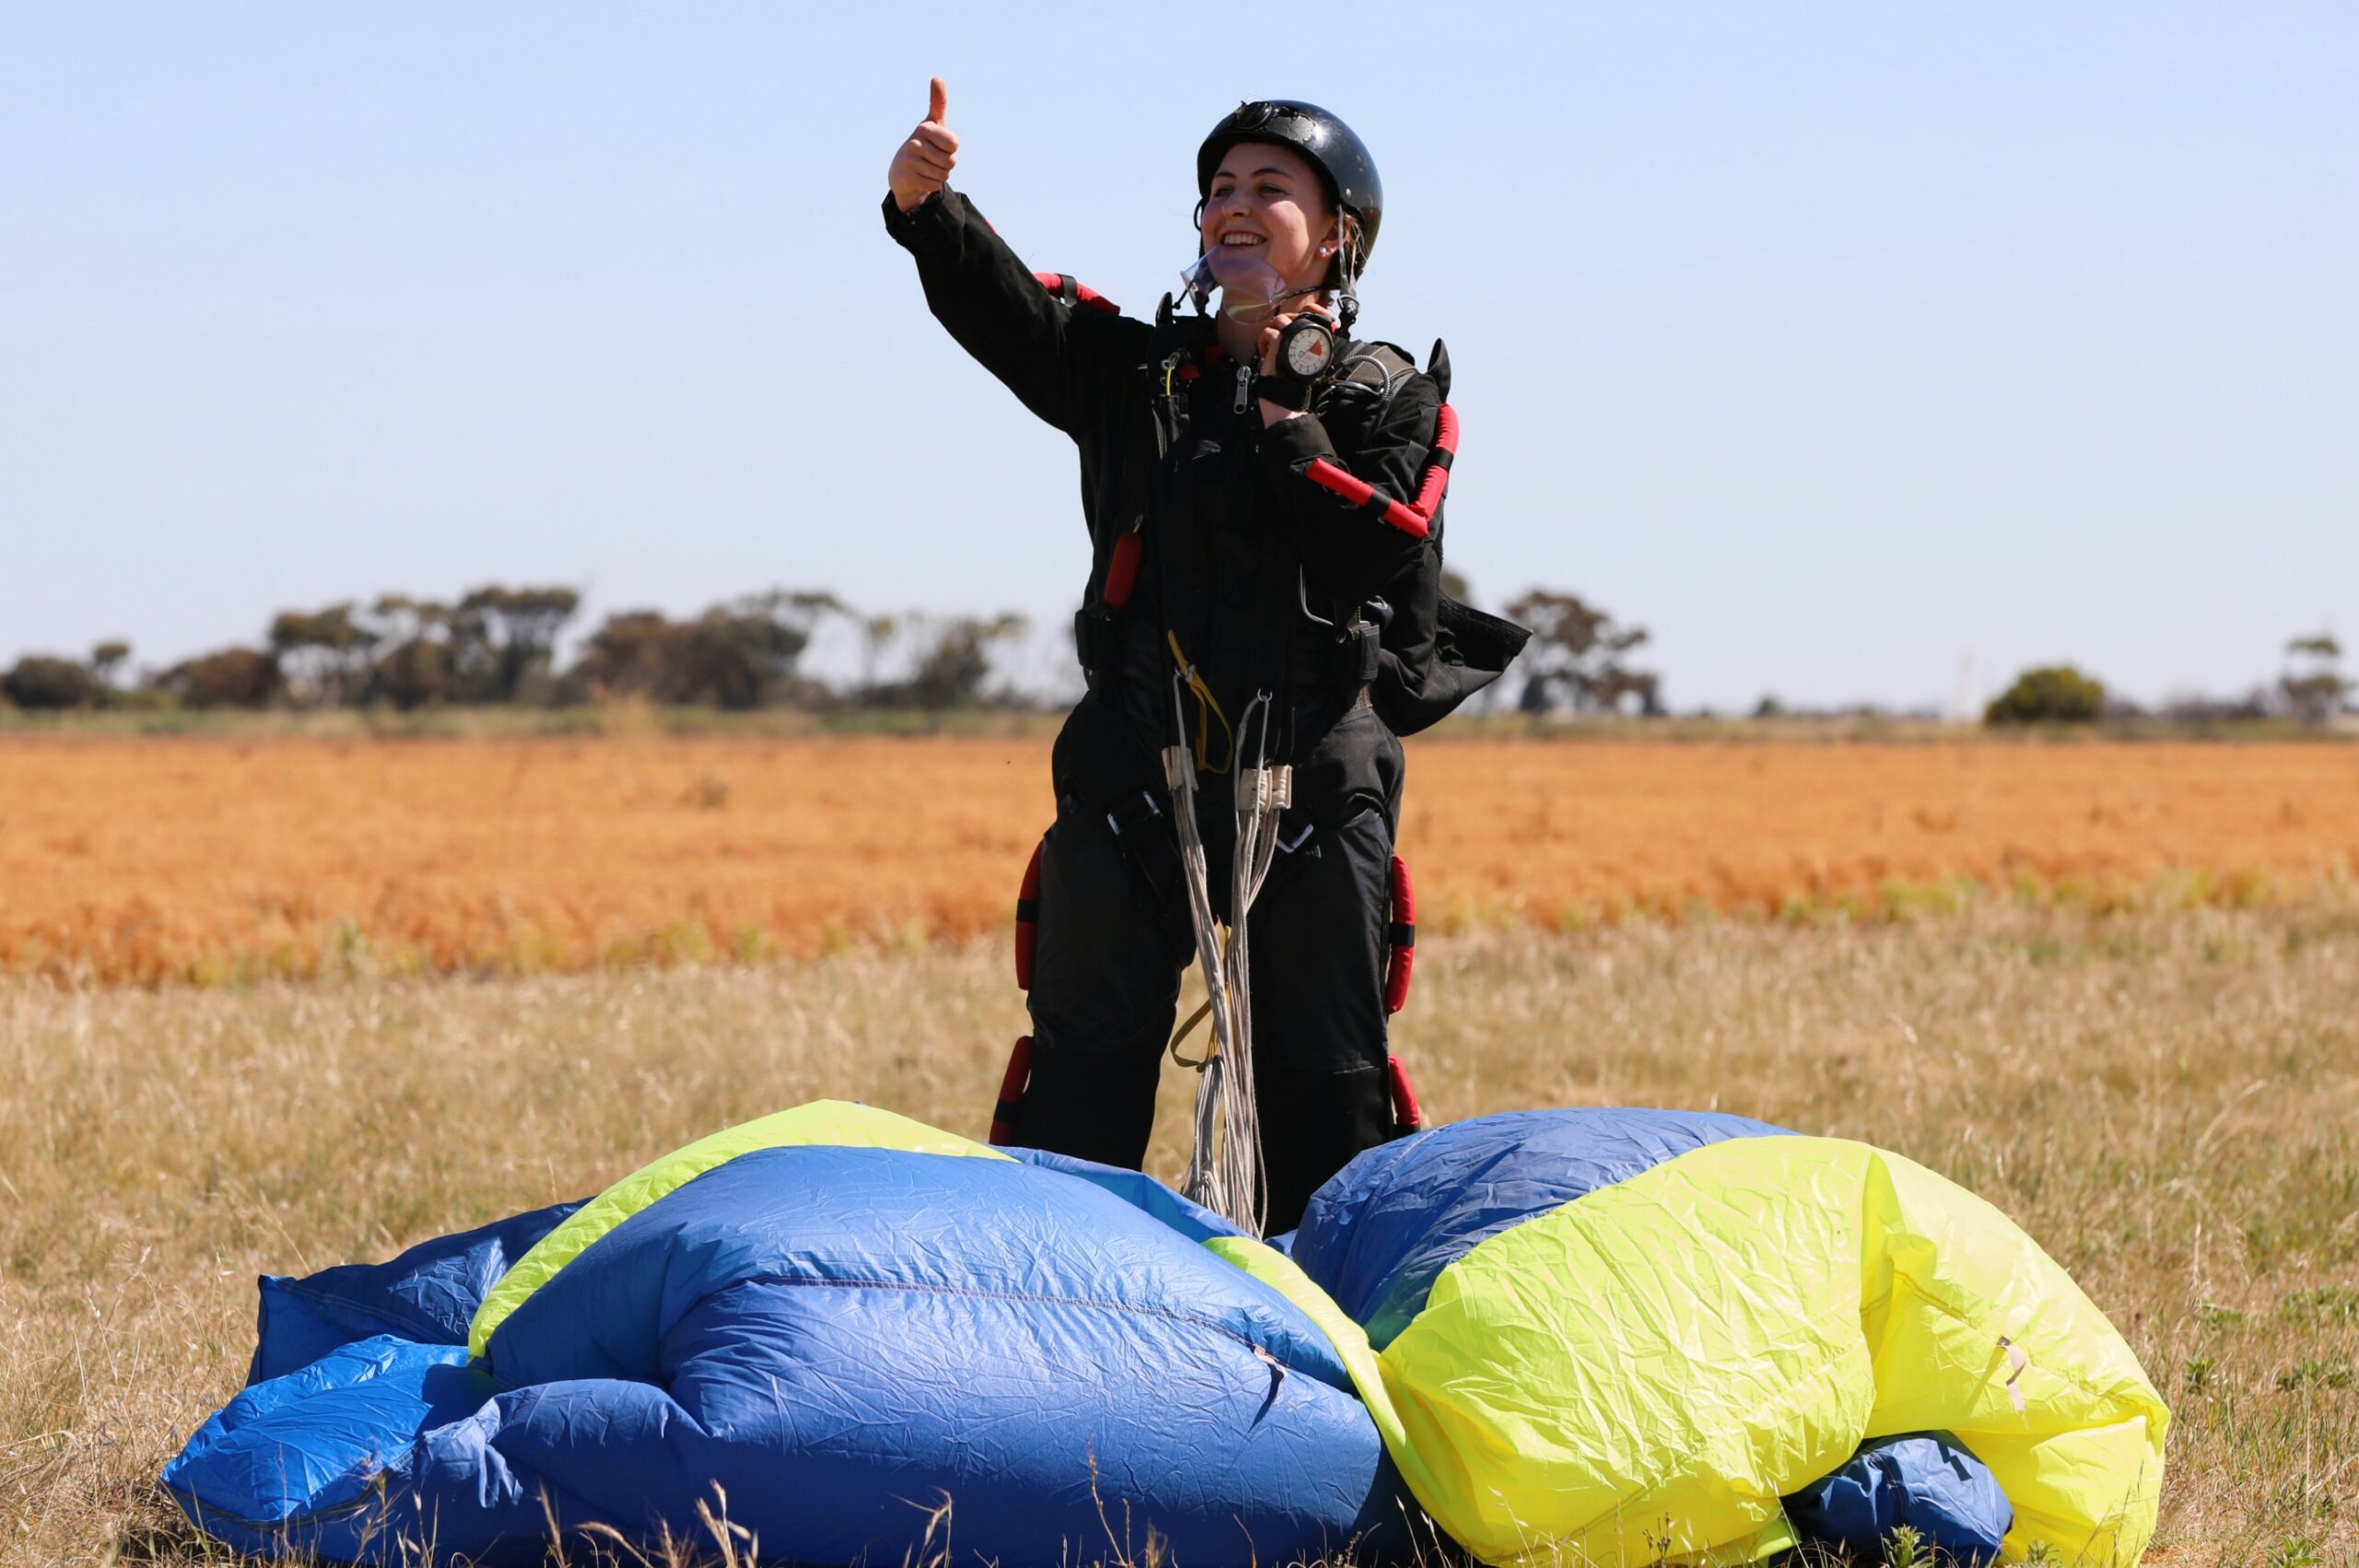 Lieutenant Grace Neuhaus gives the thumbs up following a successful landing during the accelerated freefall course at the Adelaide Skydiving Centre, South Australia. *** Local Caption *** Australian Army soldiers from 1st Armoured Regiment participated in resilience training at Lower Light, South Australia in October 2023. The activity focused on skydiving with members training with Adelaide Skydiving Centre to go from novices through to obtaining their A licence at the conclusion of the course.